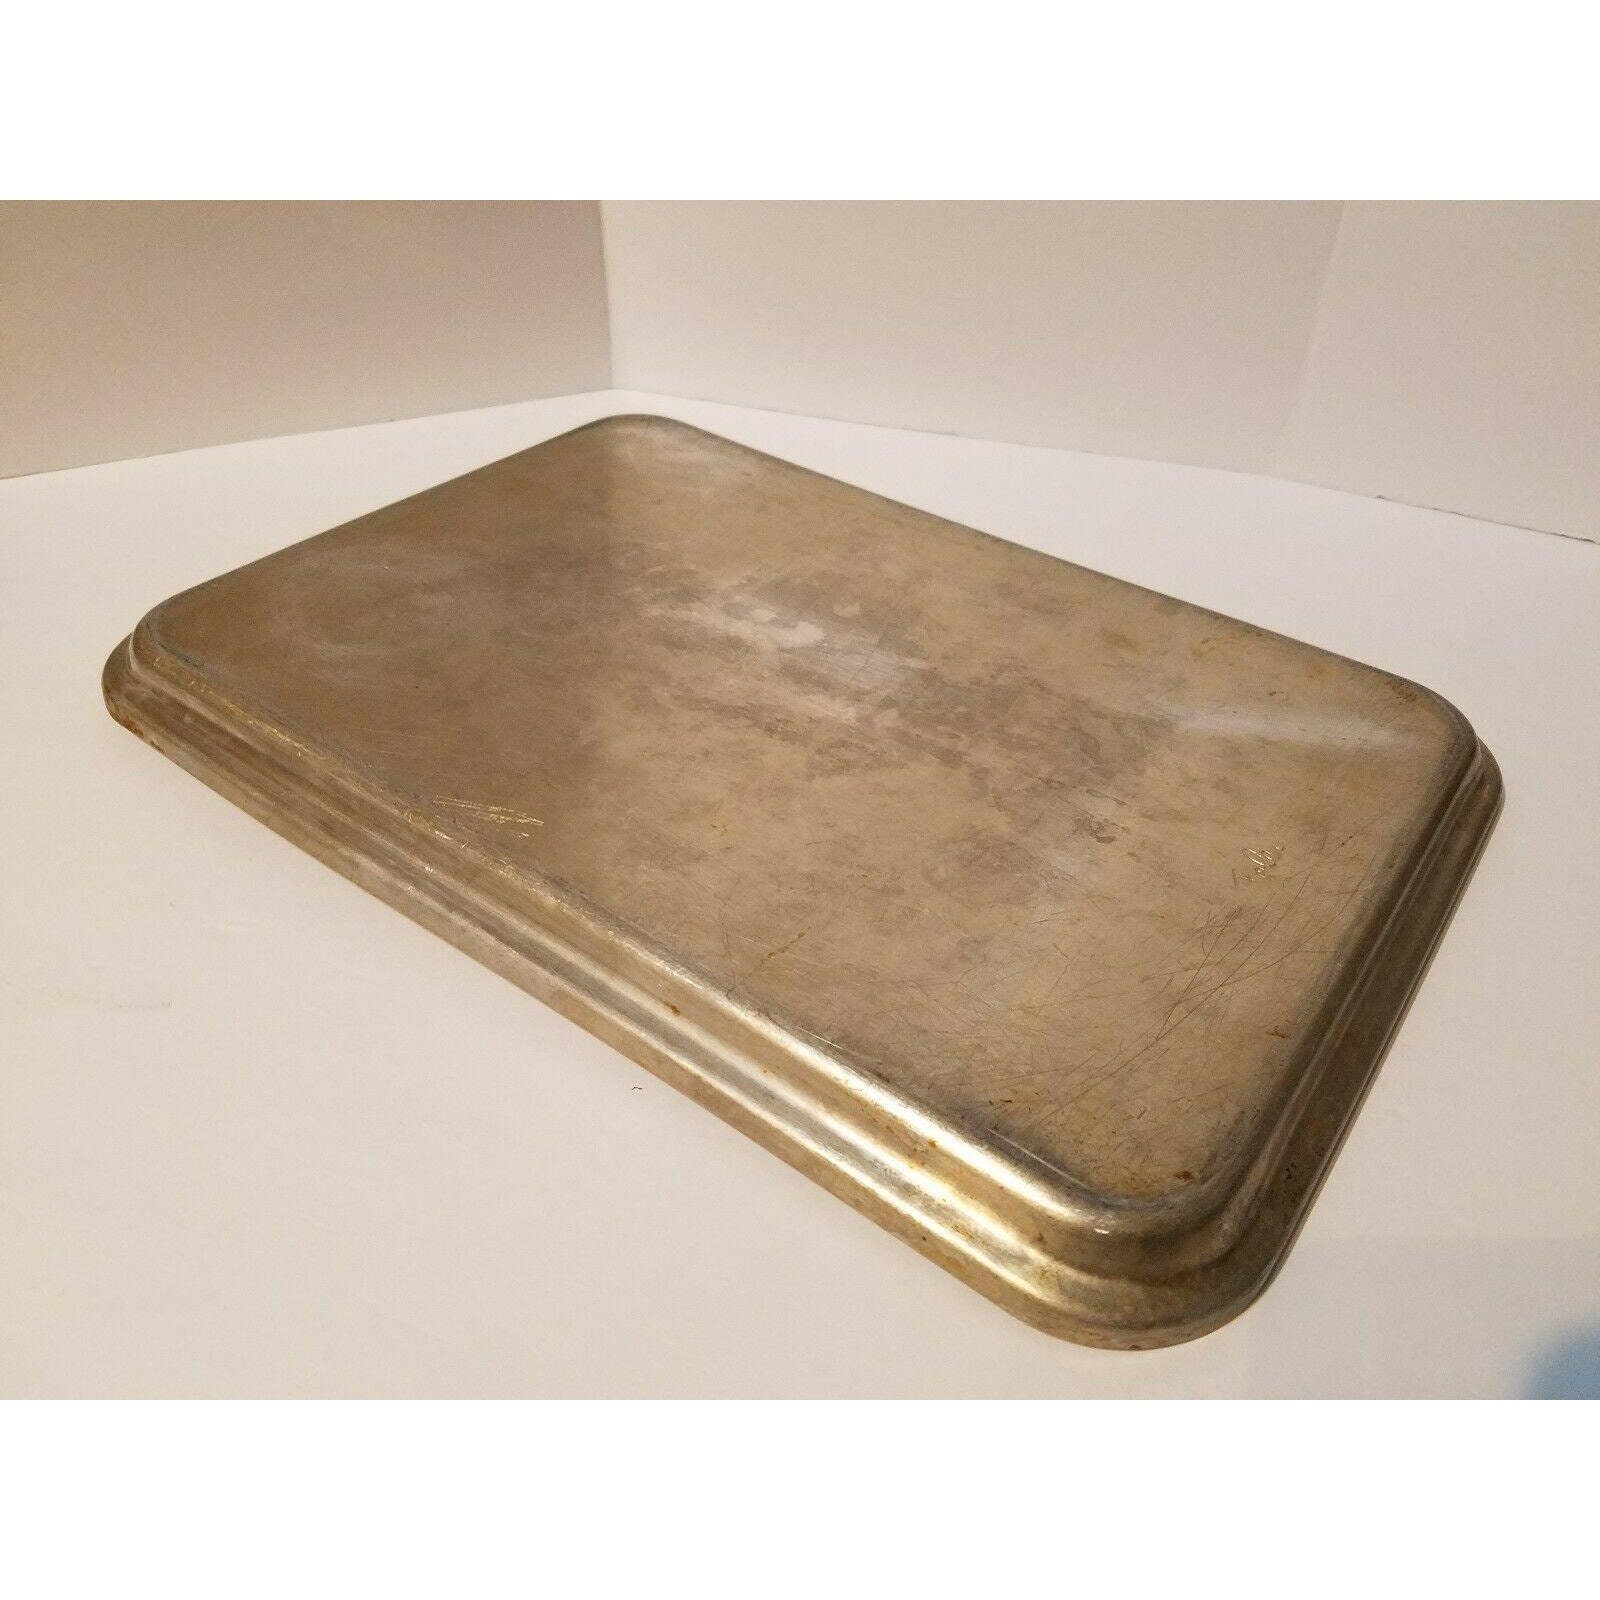 VTG 2 Foley Aluminum Cover Lid Replacement 9 x 13 Cake Pan